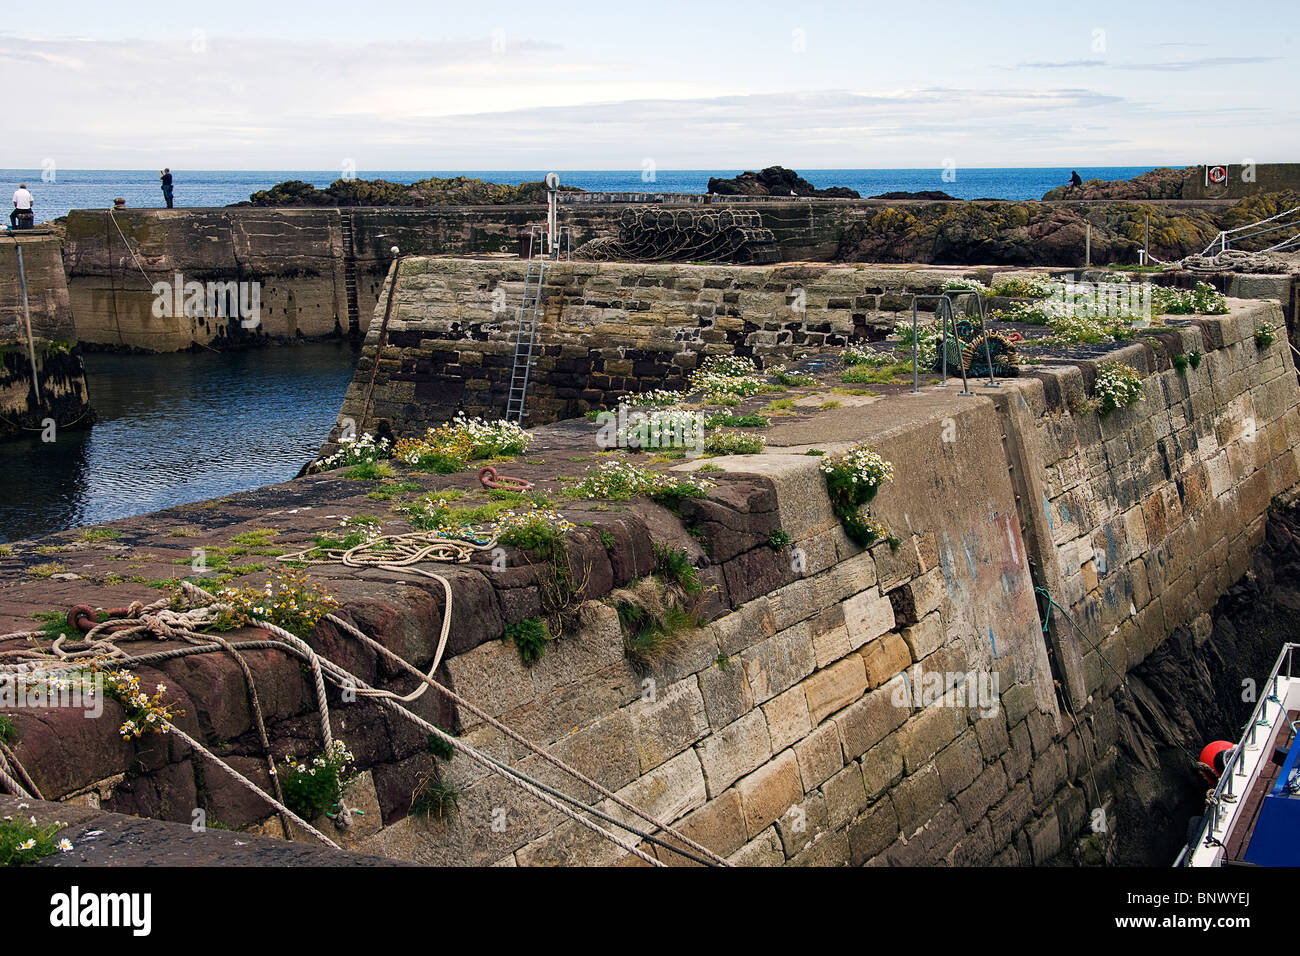 Sea mayweed at St Abbs harbour. Scotland. Stock Photo